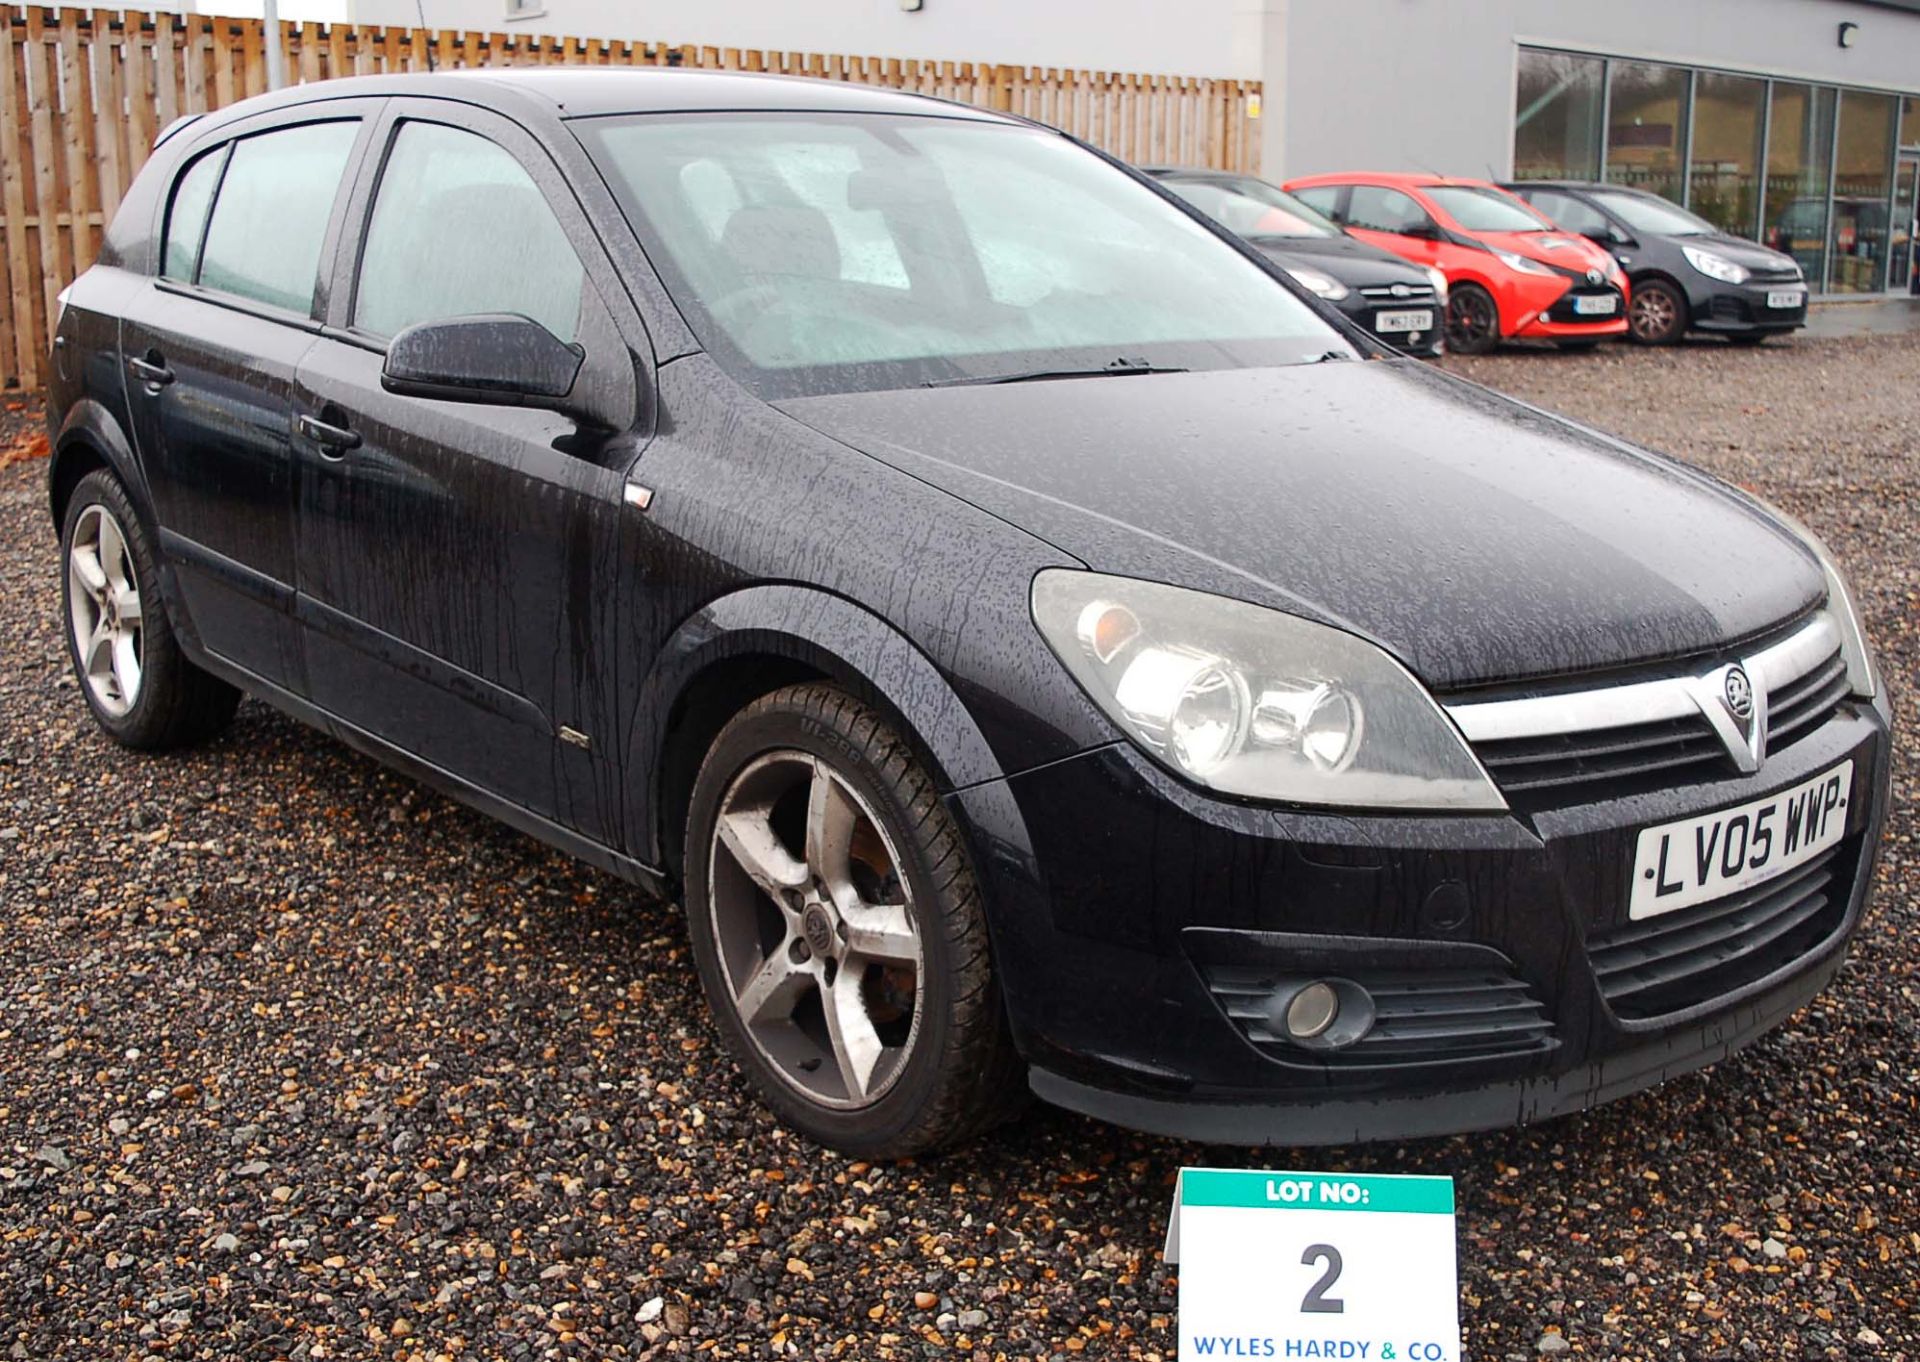 A VAUXHALL ASTRA 1.8 SRI 5-Door Hatchback Registration Number: LV05 WWP. 4-Speed Automatic